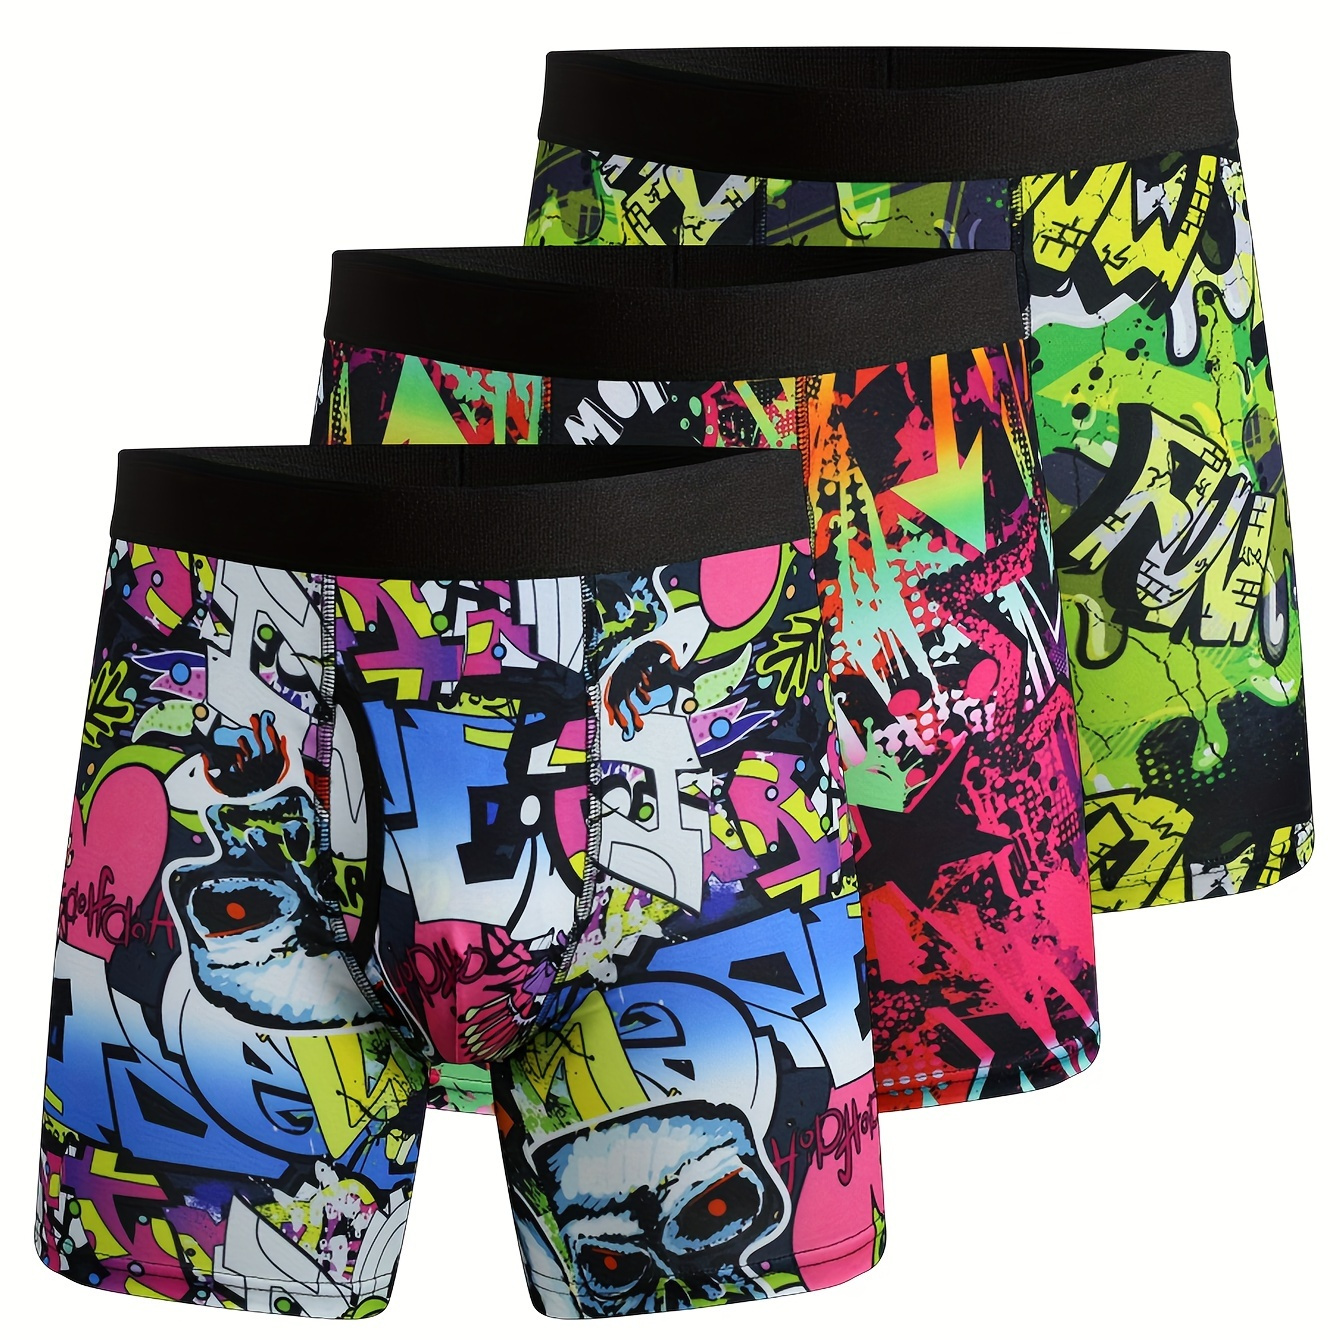 

3pcs Men's Fashion Graffiti Graphic Long Boxer Briefs Shorts, Breathable Comfy Quick Drying Stretchy Boxer Trunks, Sports Trunks, Swim Trunks For Beach Pool, Men's Novelty Underwear